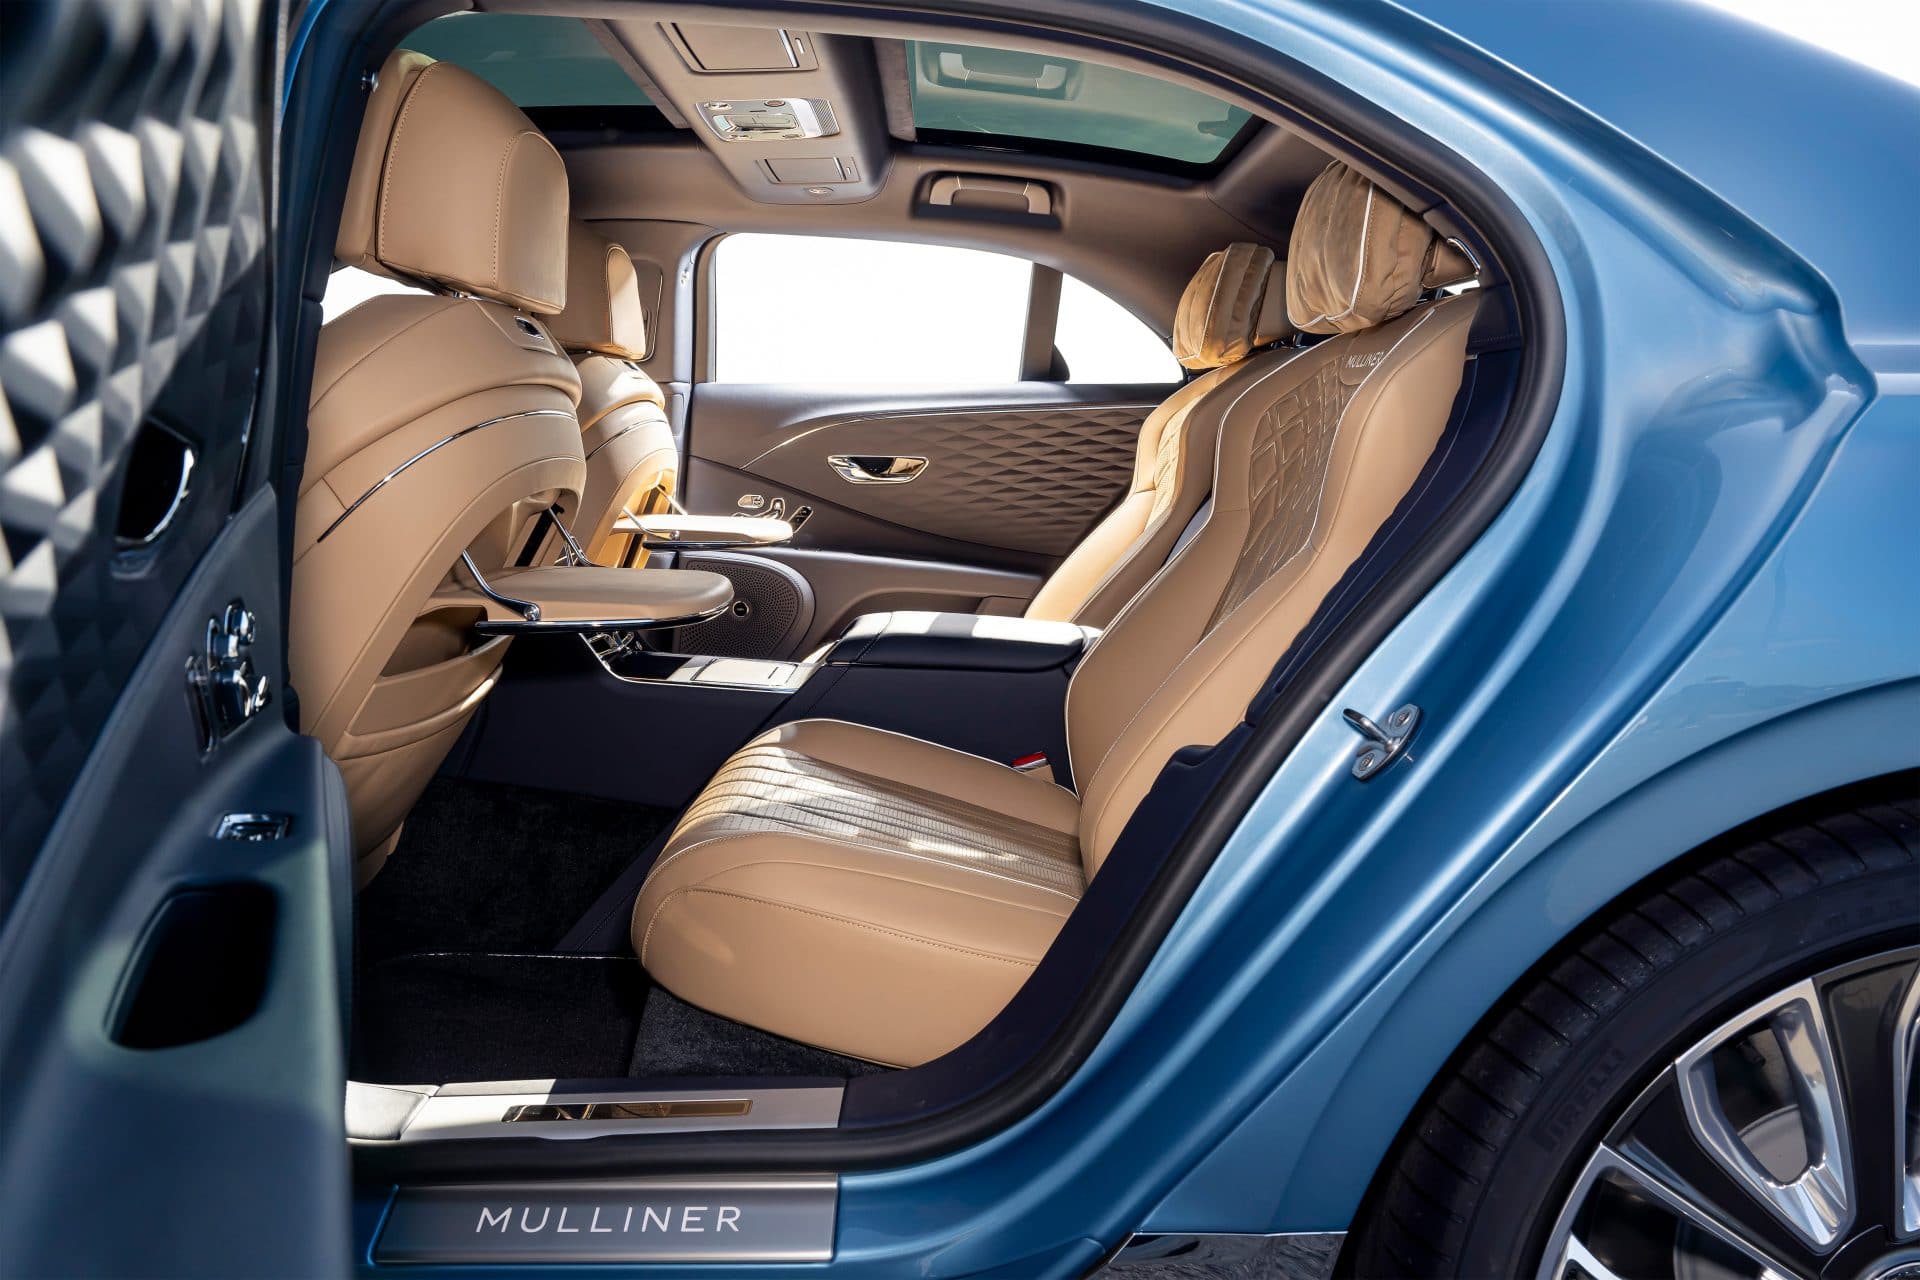 Flying Spur Mulliner 6 BENTLEY FLYING SPUR MULLINER : Κορυφαία εμπειρία Grand Touring